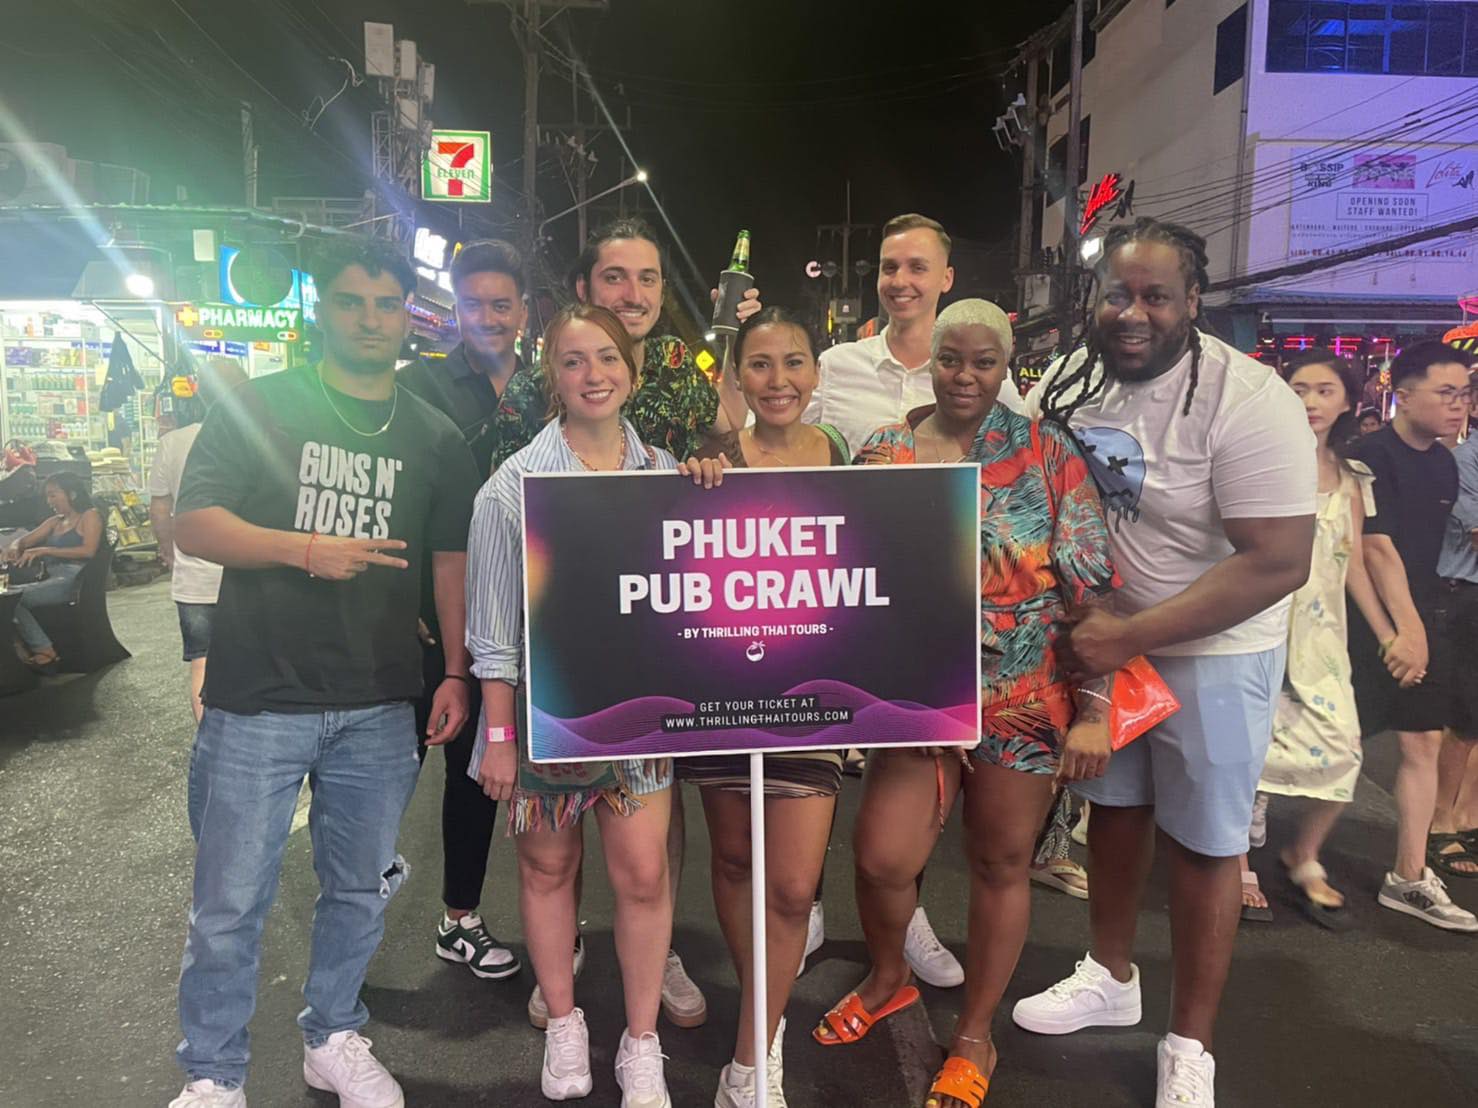 The Phuket Pub Crawl offers a whirlwind of music, laughter, and unforgettable moments.